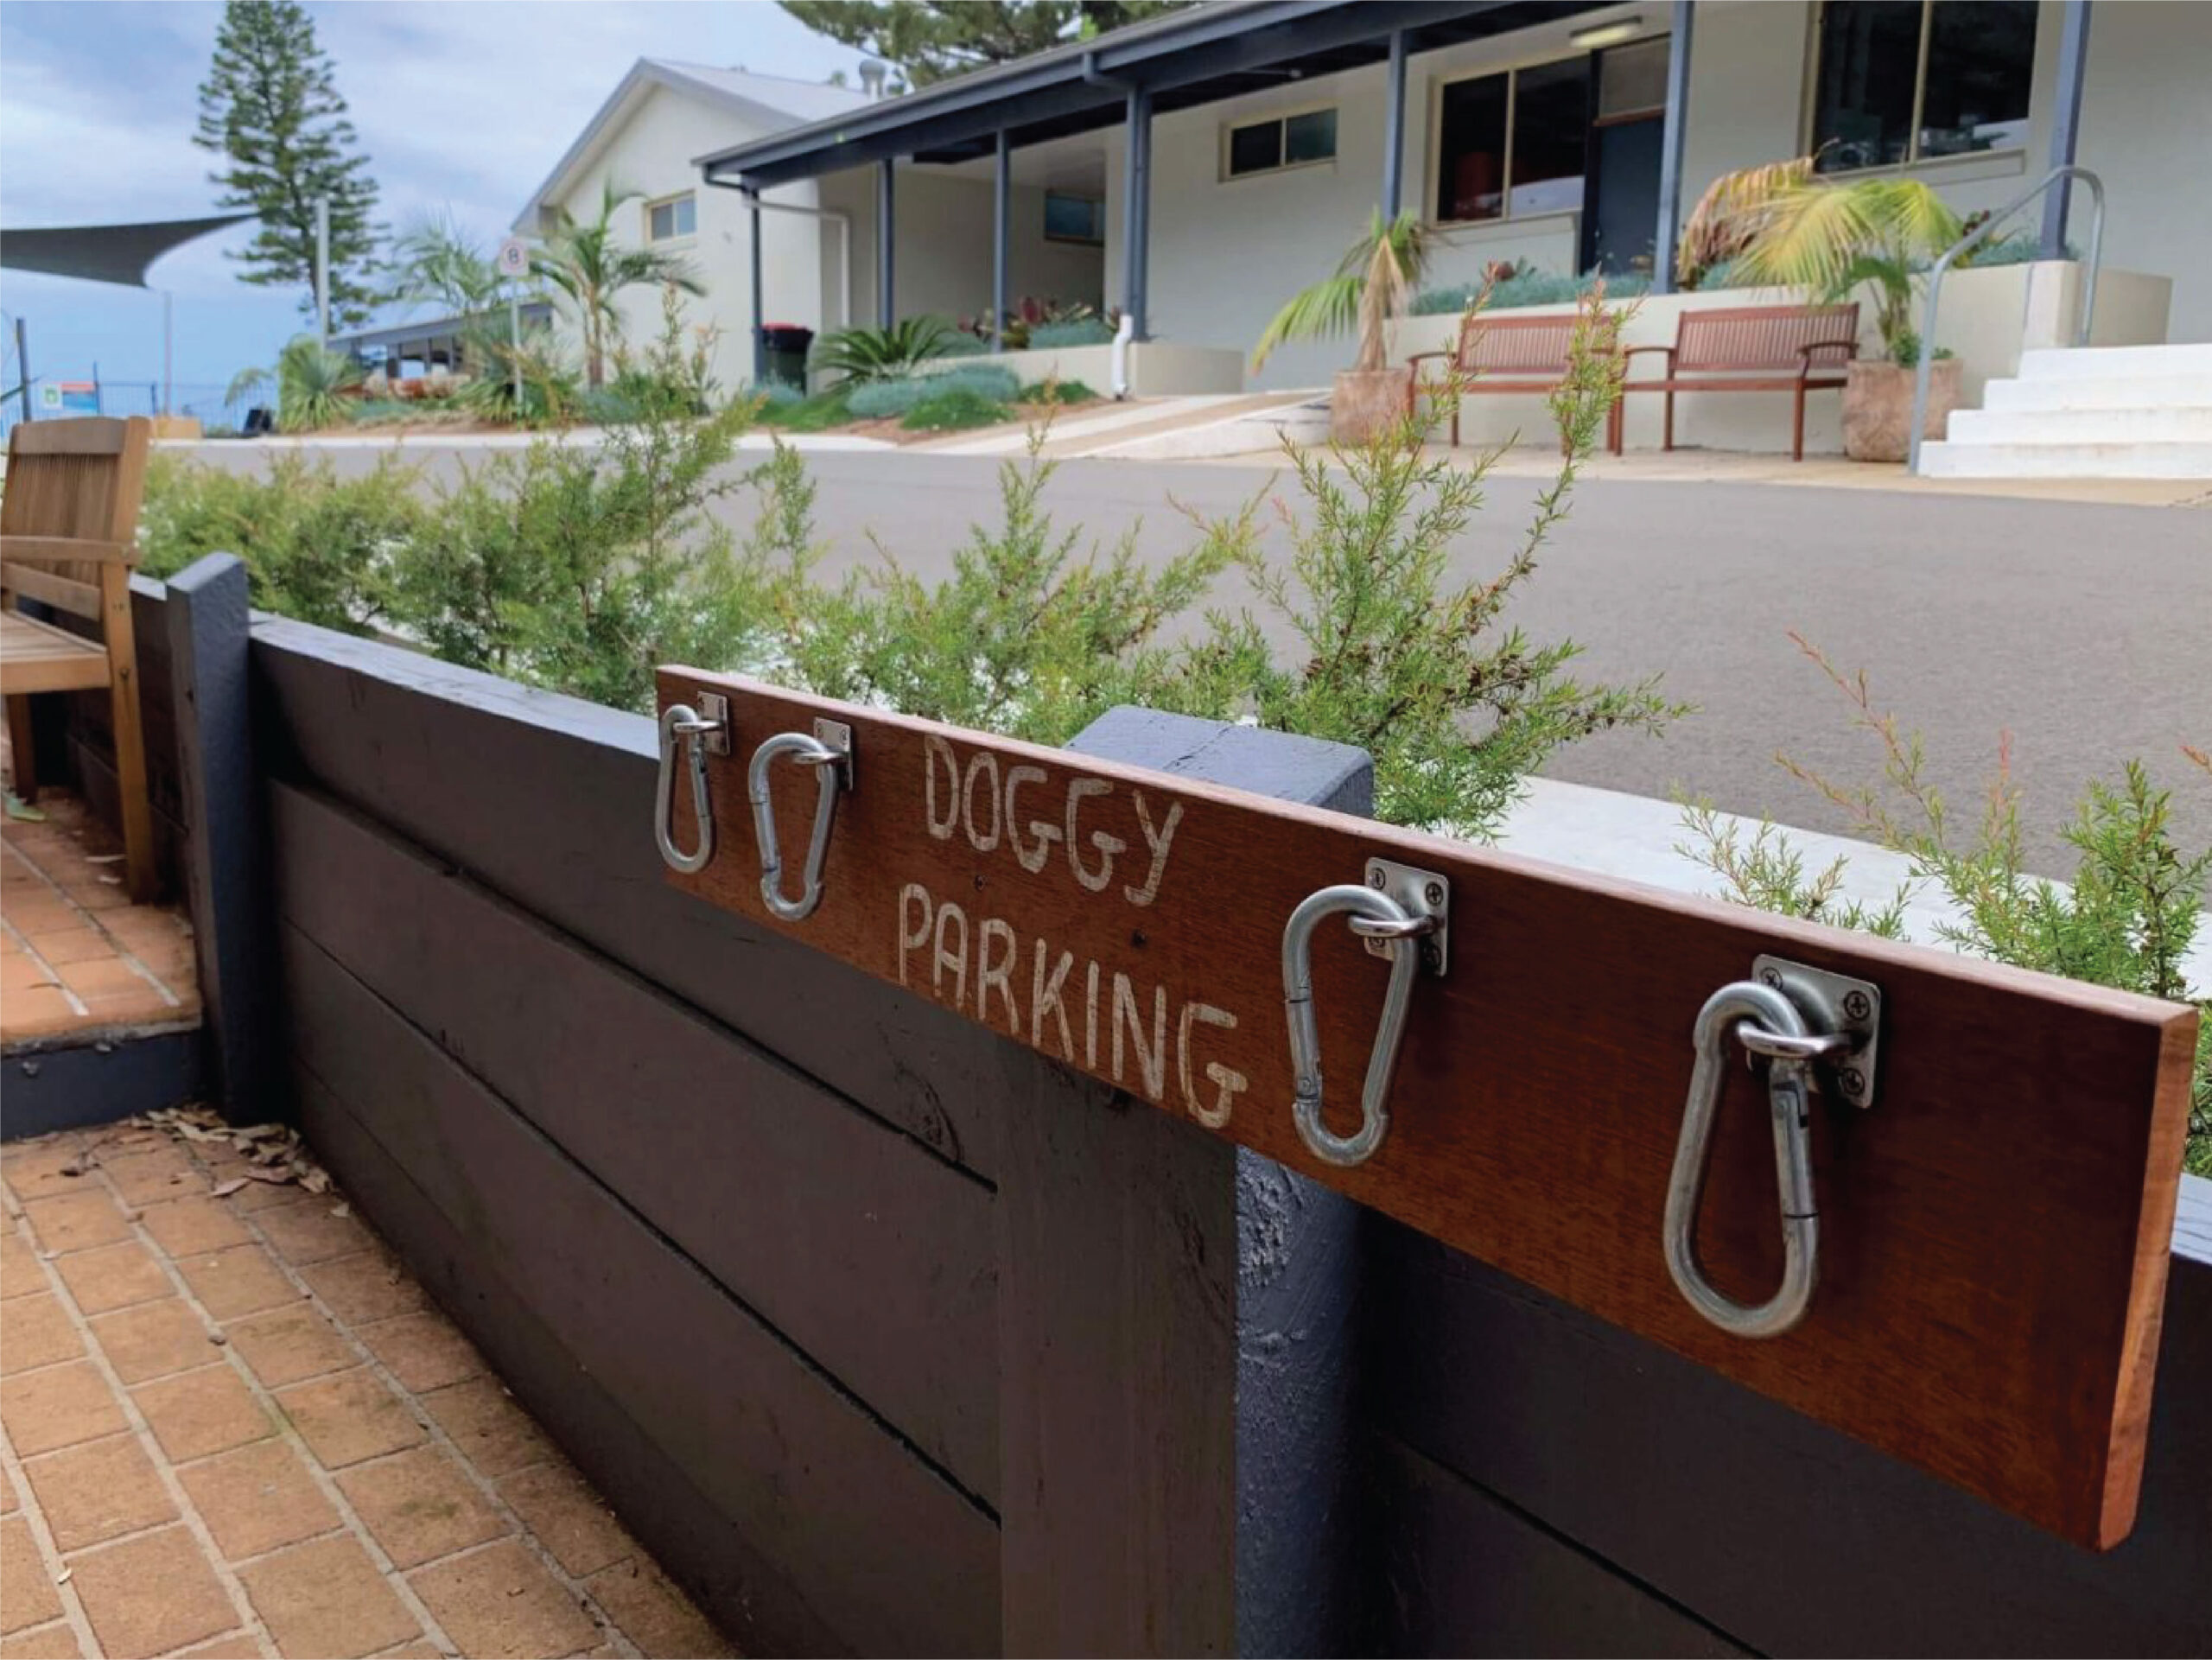 Surf Beach Holiday Park's (free!) Doggy Parking